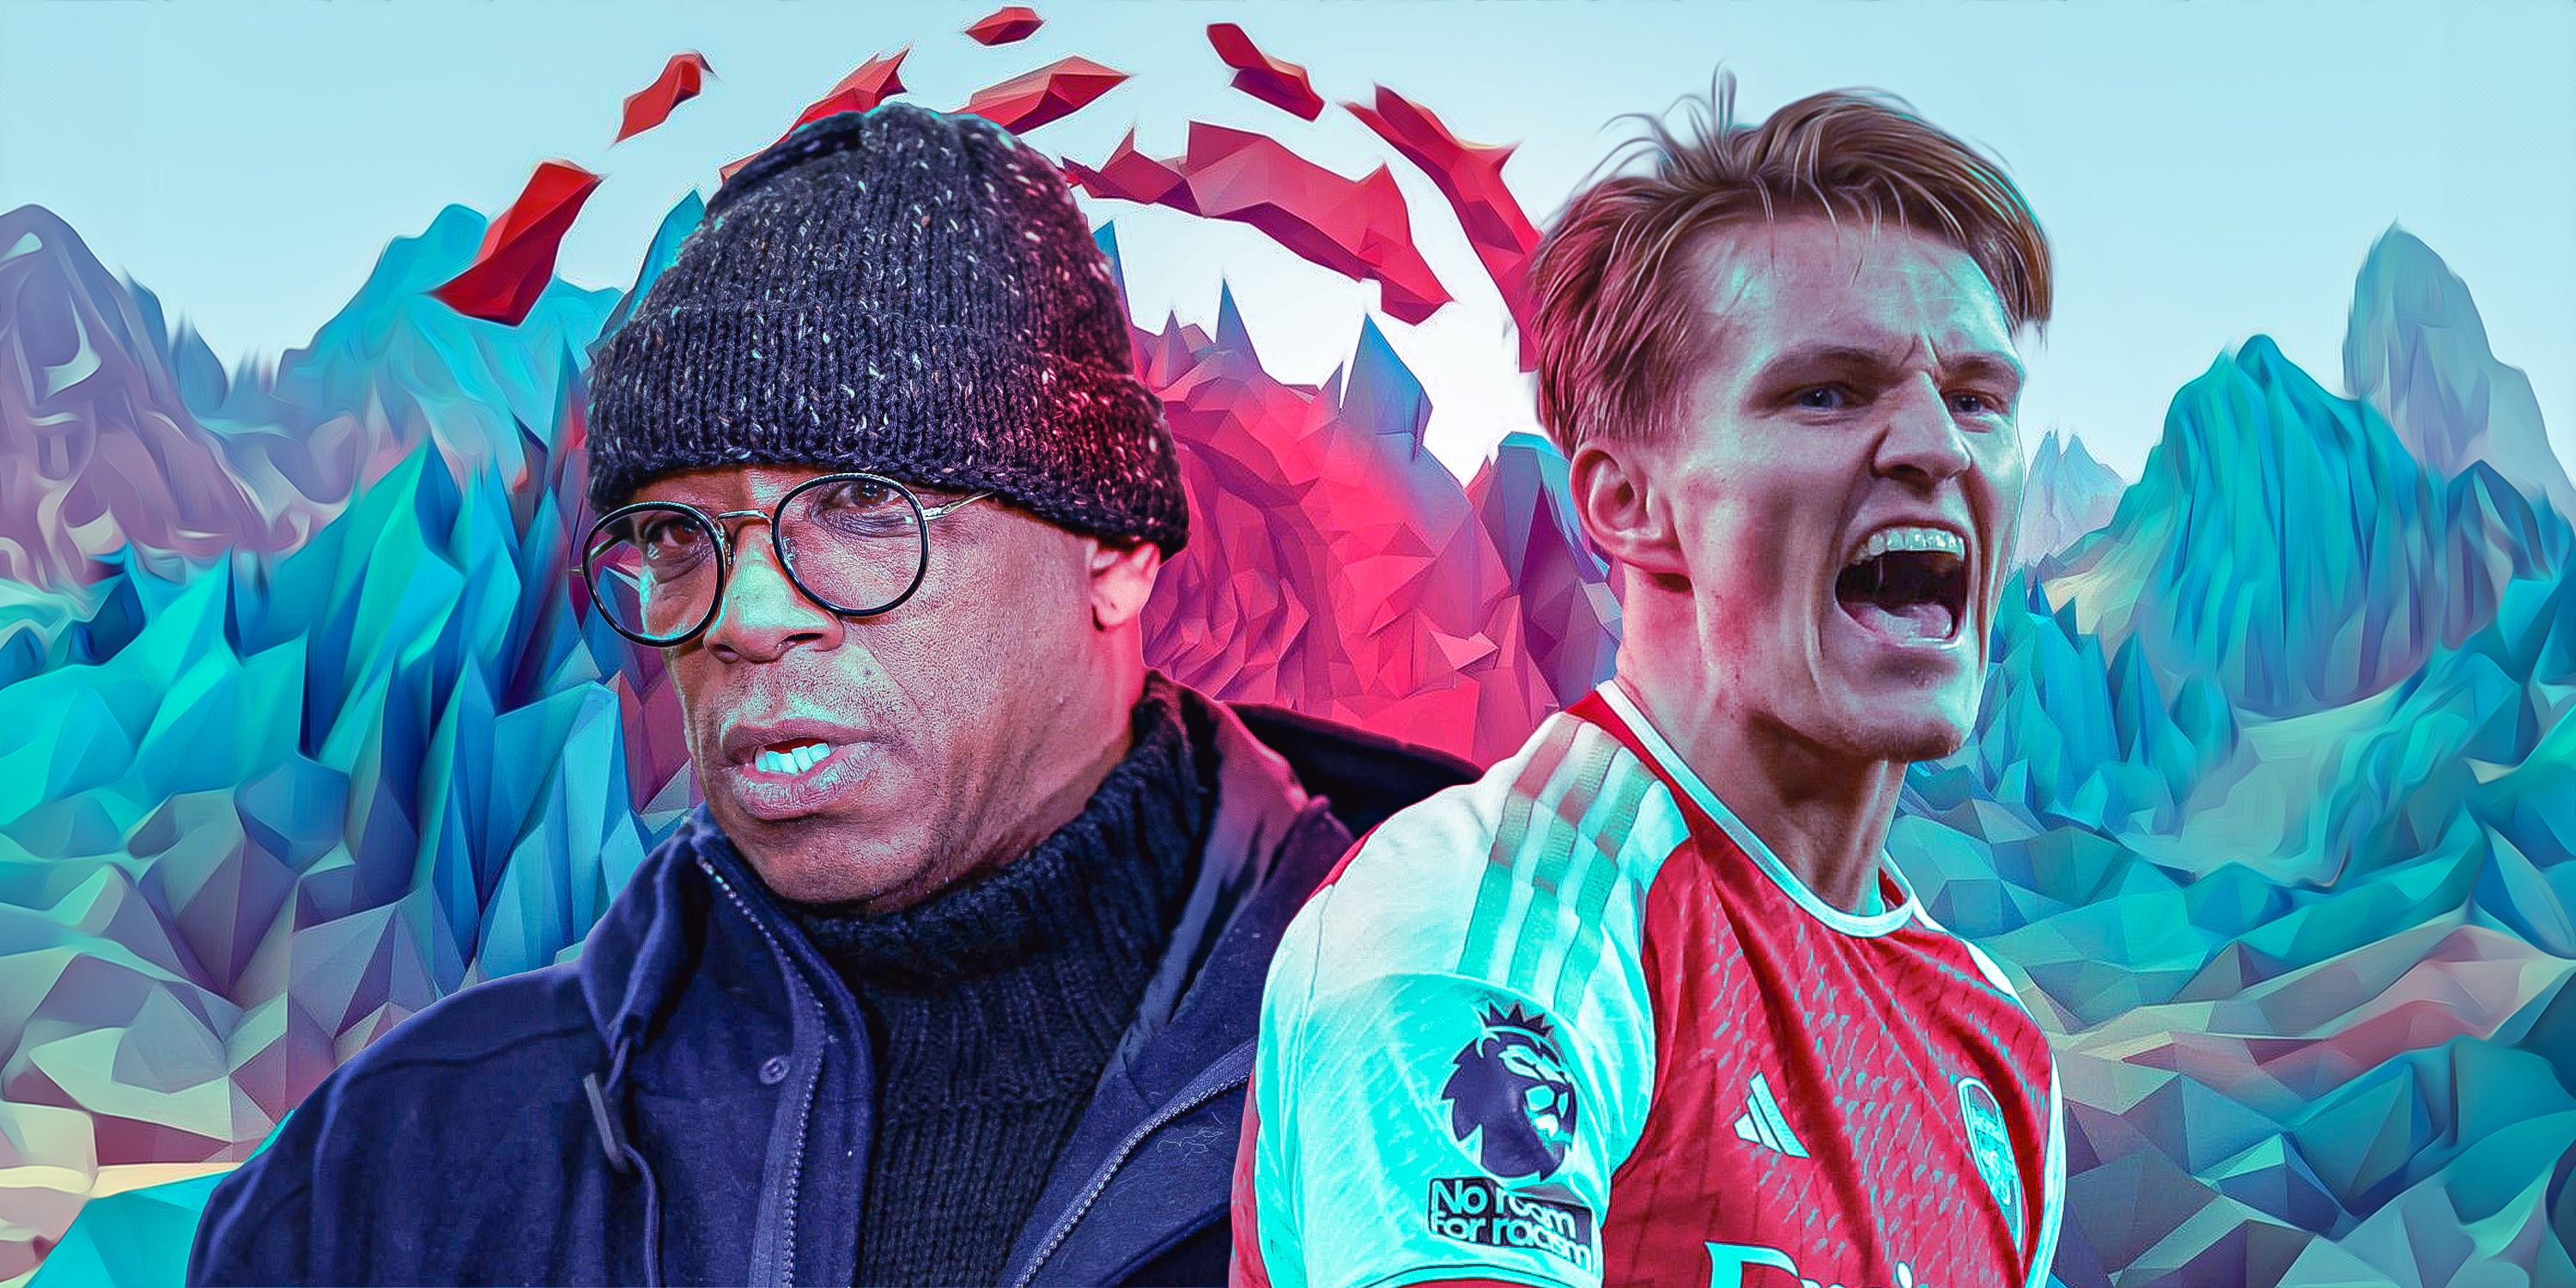 Ian-Wright-defends-Martin-Odegaard-and-Mikel-Arteta-after-Arsenal-3-1-Liverpool